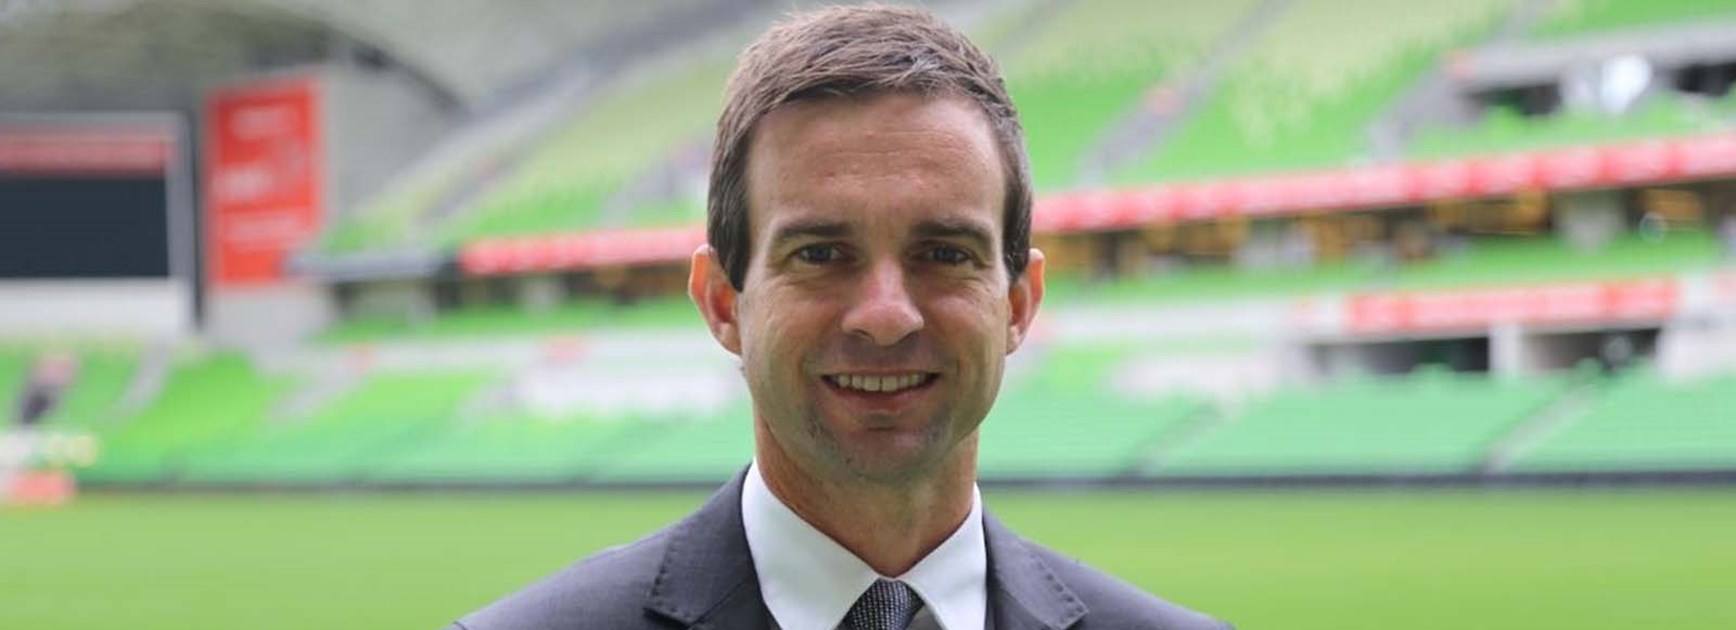 Dave Donaghy has been appointed Melbourne Storm's next Chief Executive Officer.